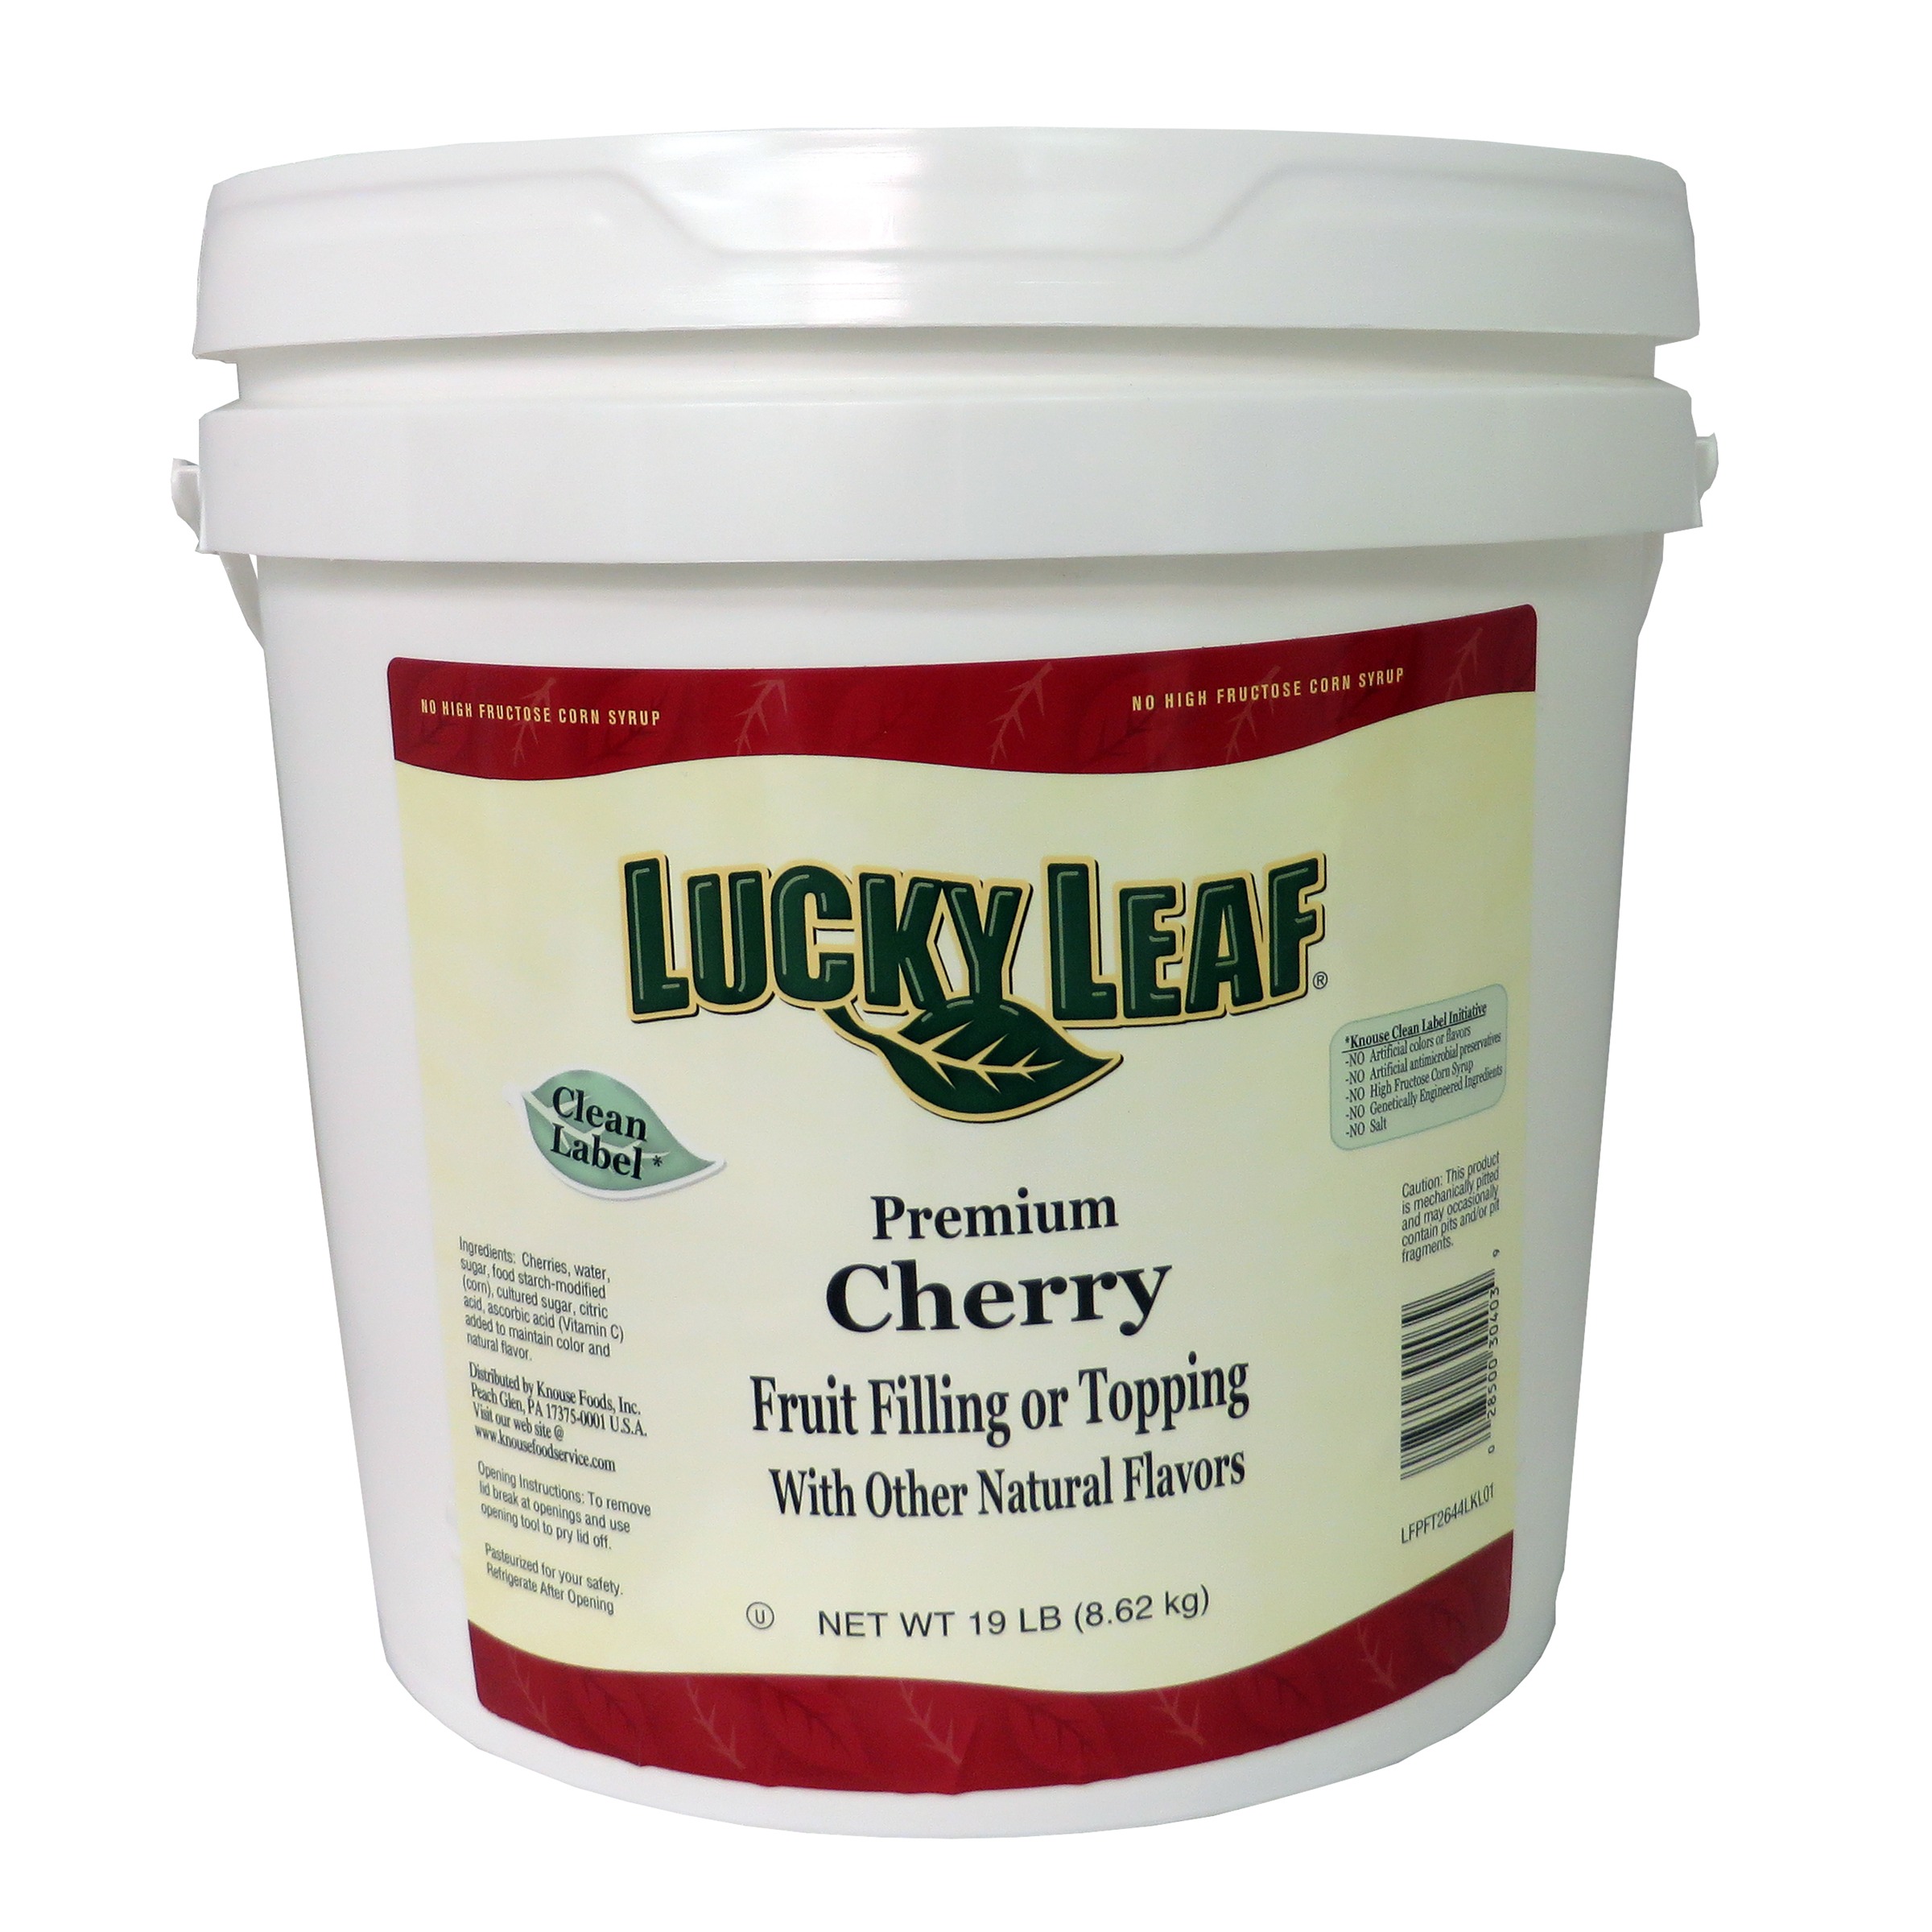 LUCKY LEAF ‘Clean Label’ Premium CHERRY Fruit Filling or Topping – 19# ROUND PAIL